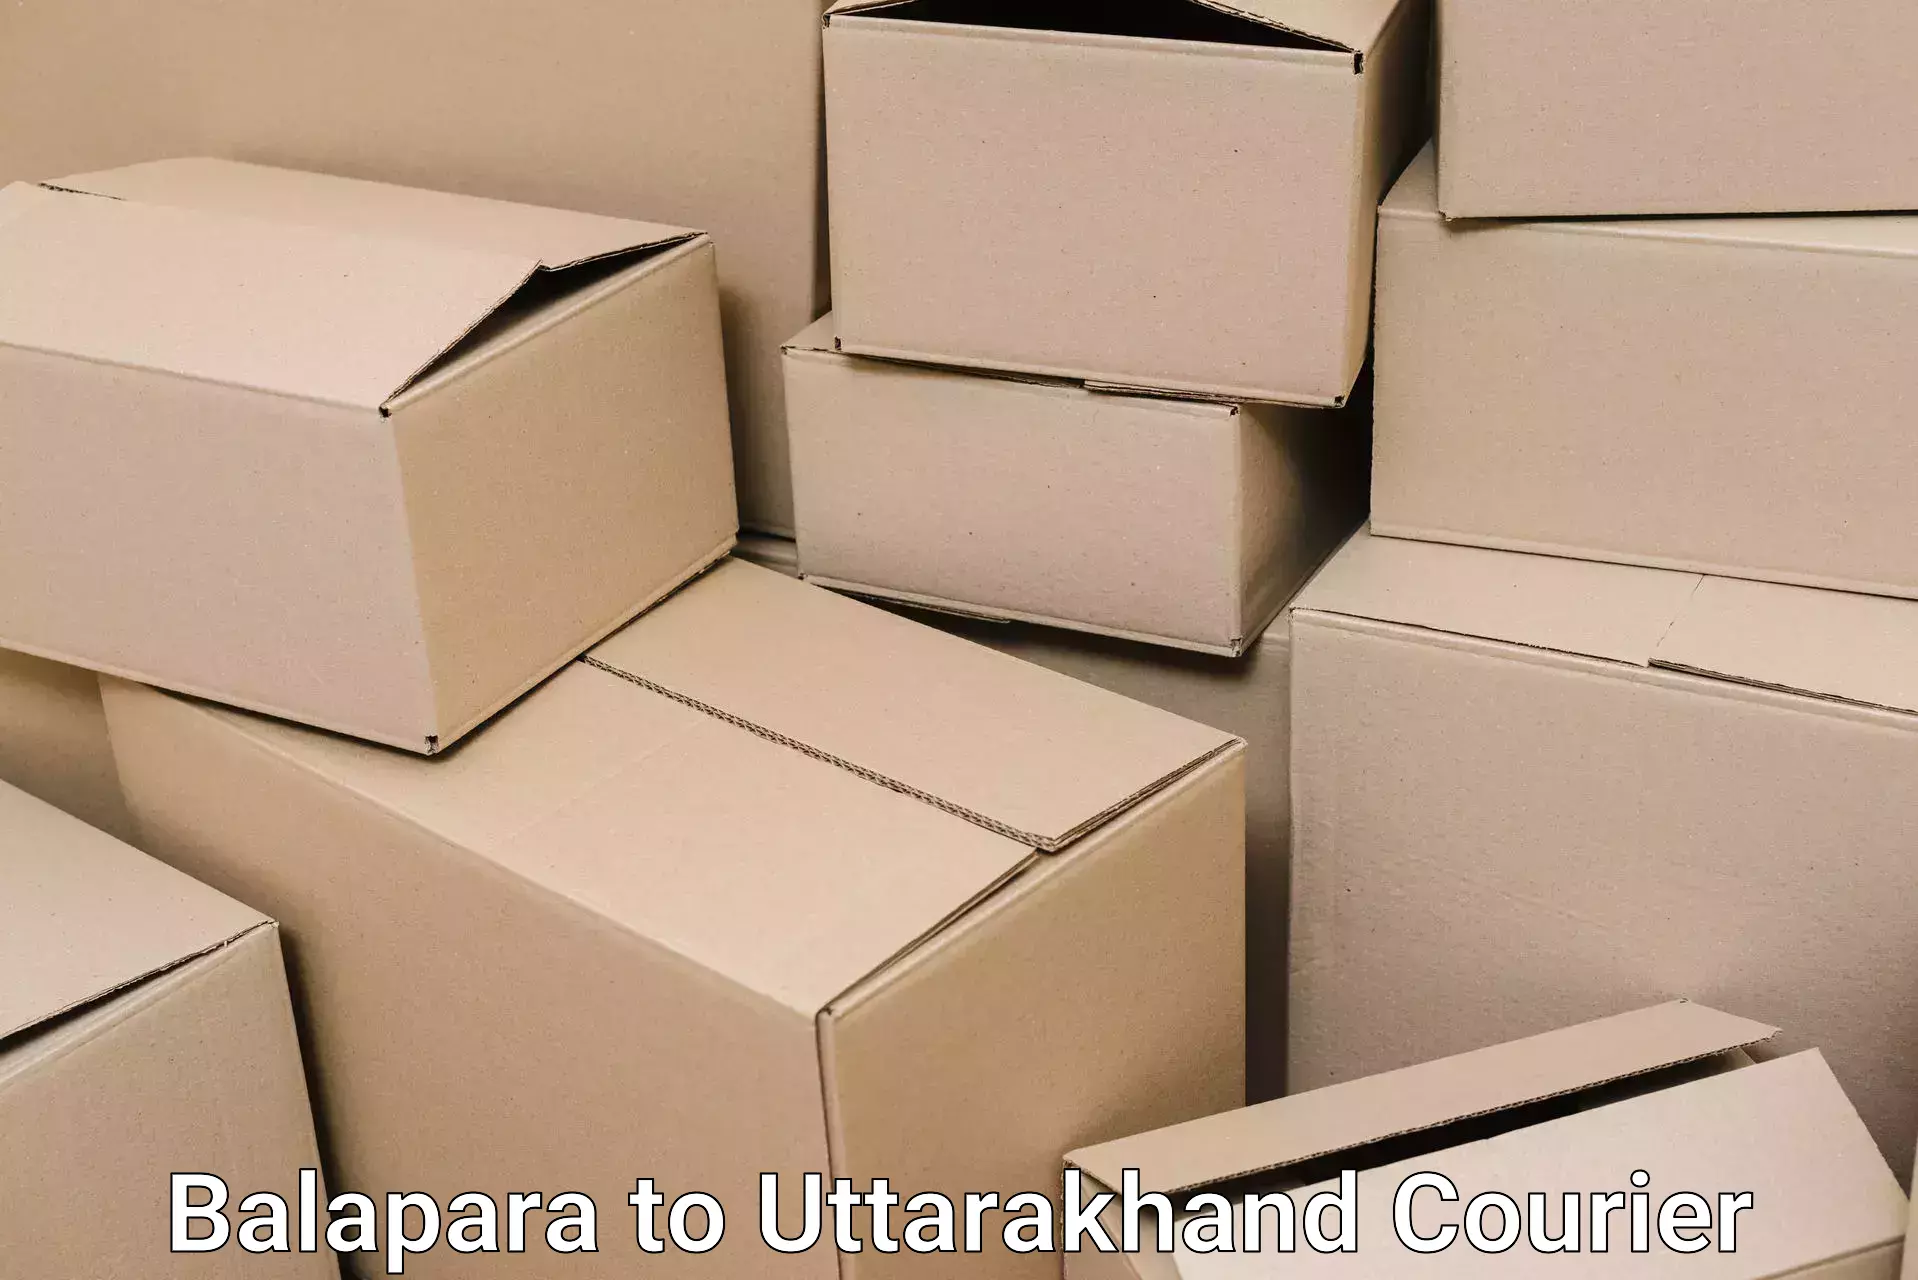 Home goods moving company Balapara to Roorkee